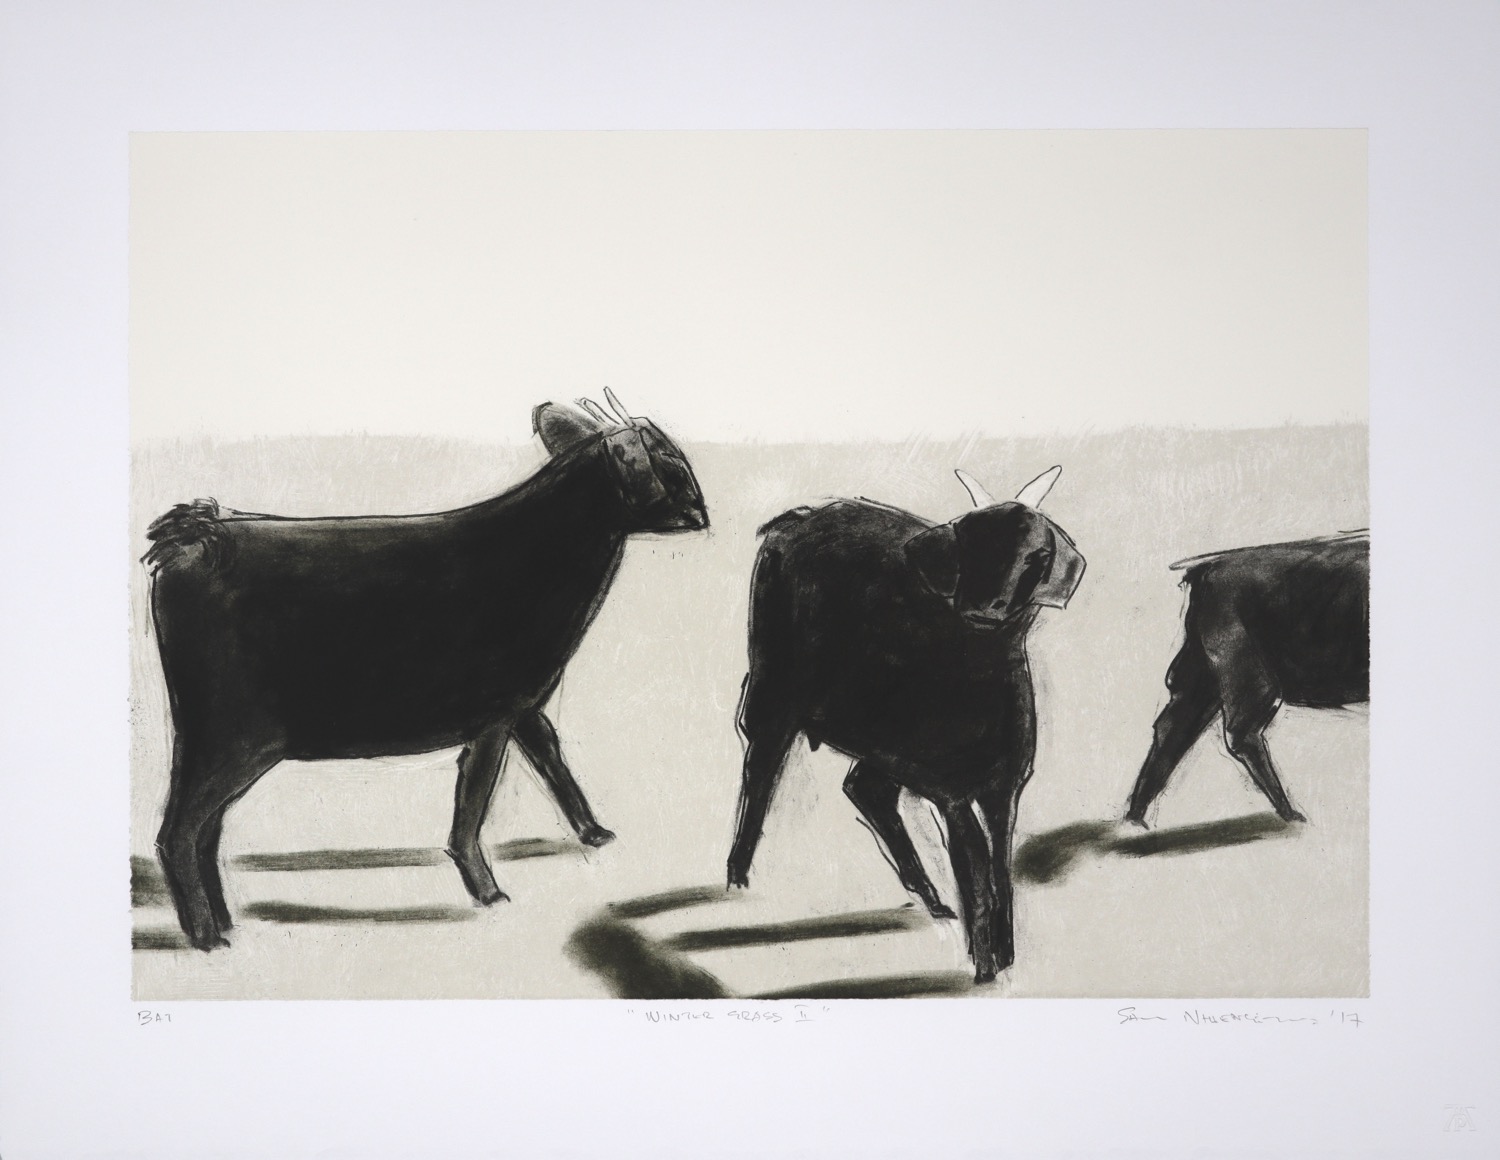 Three goats drawn in charcoal and simplified to elegant forms set in barren landscape